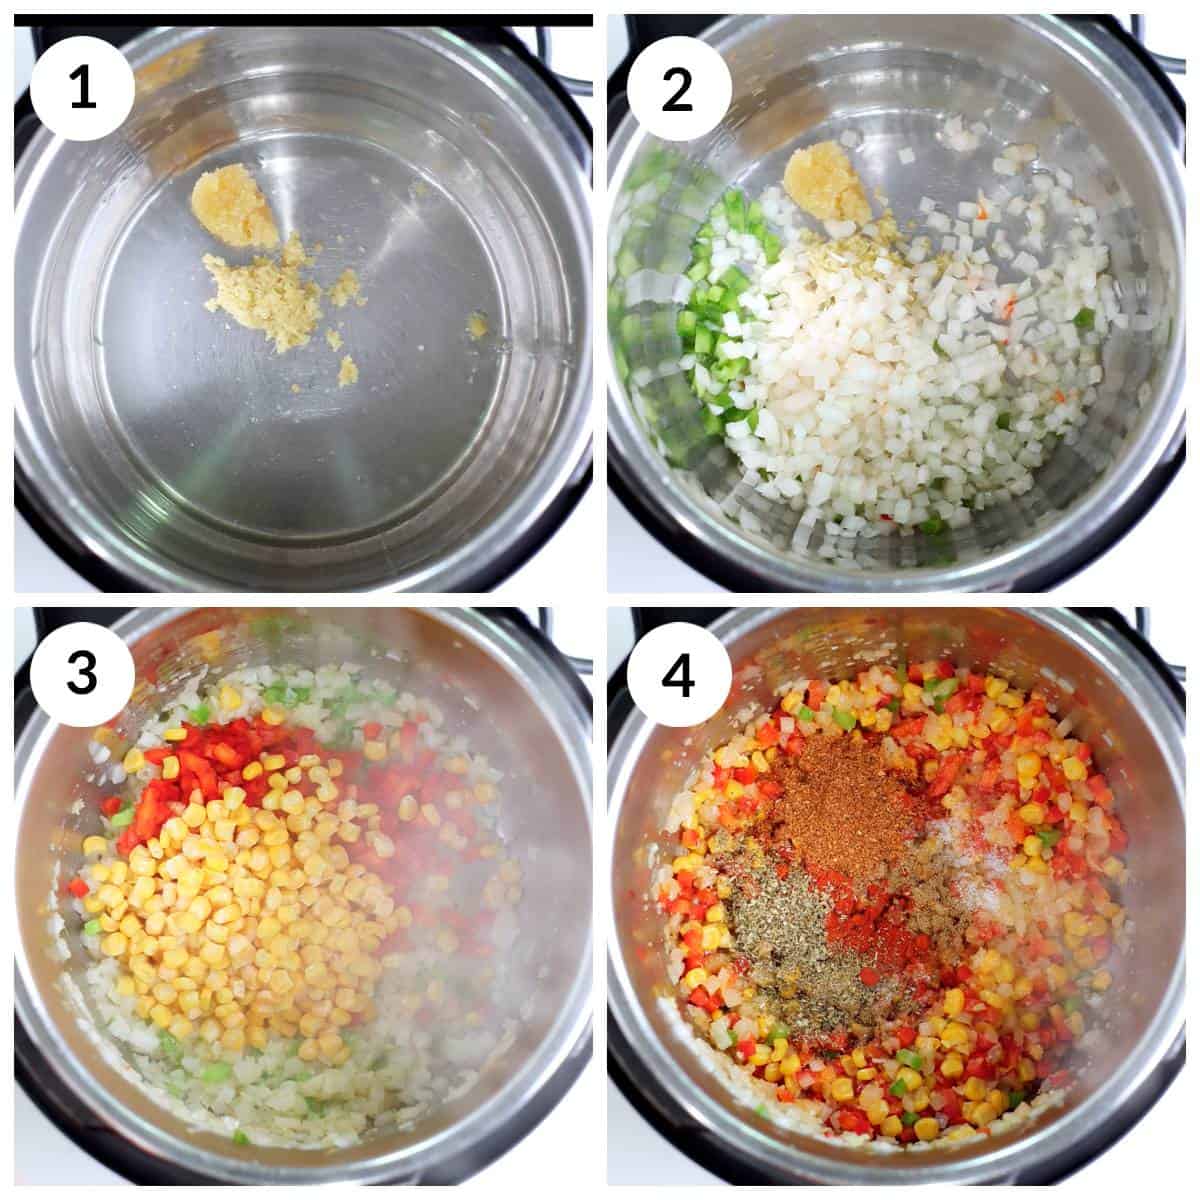 4 steps for sauteing veggies and spices for Taco pasta in Instant Pot